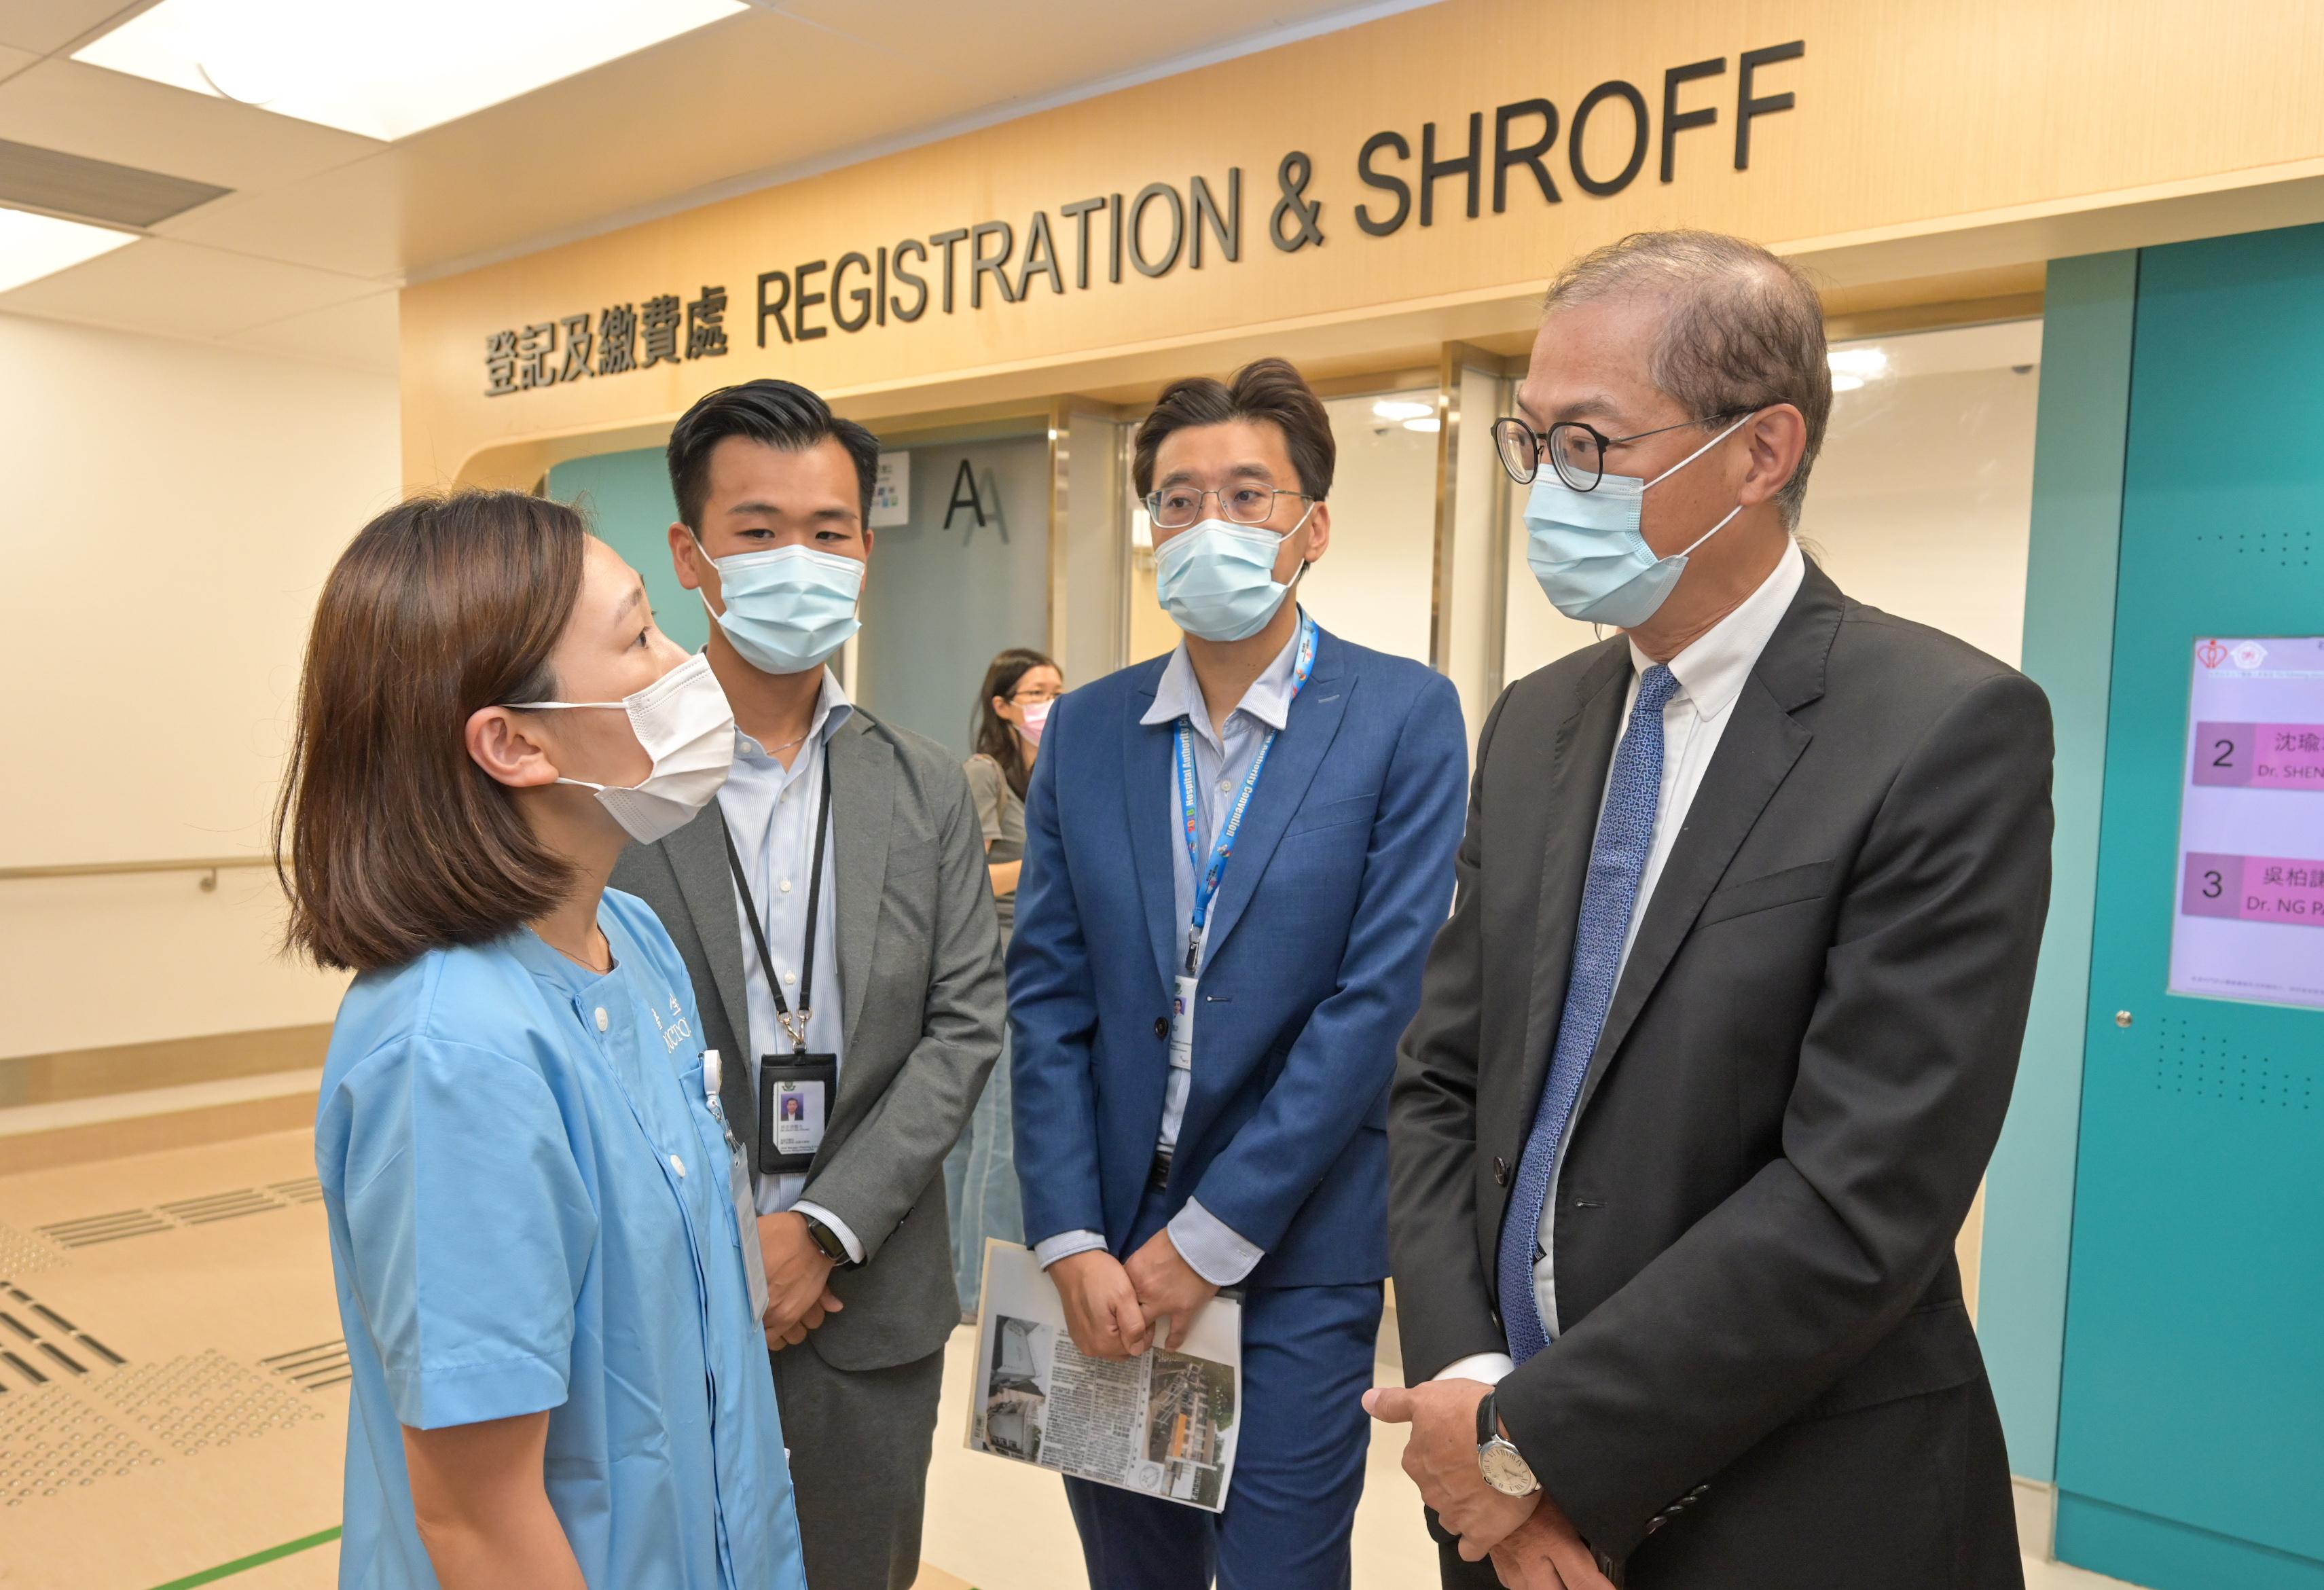 The Secretary for Health, Professor Lo Chung-mau, visited the Shek Kip Mei Health Centre and the temporary Shek Kip Mei General Out-patient Clinic this morning (September 27). Photos shows Professor Lo (first right) chatting with a frontline doctor at the temporary Shek Kip Mei General Out-patient Clinic to learn more about its operation.